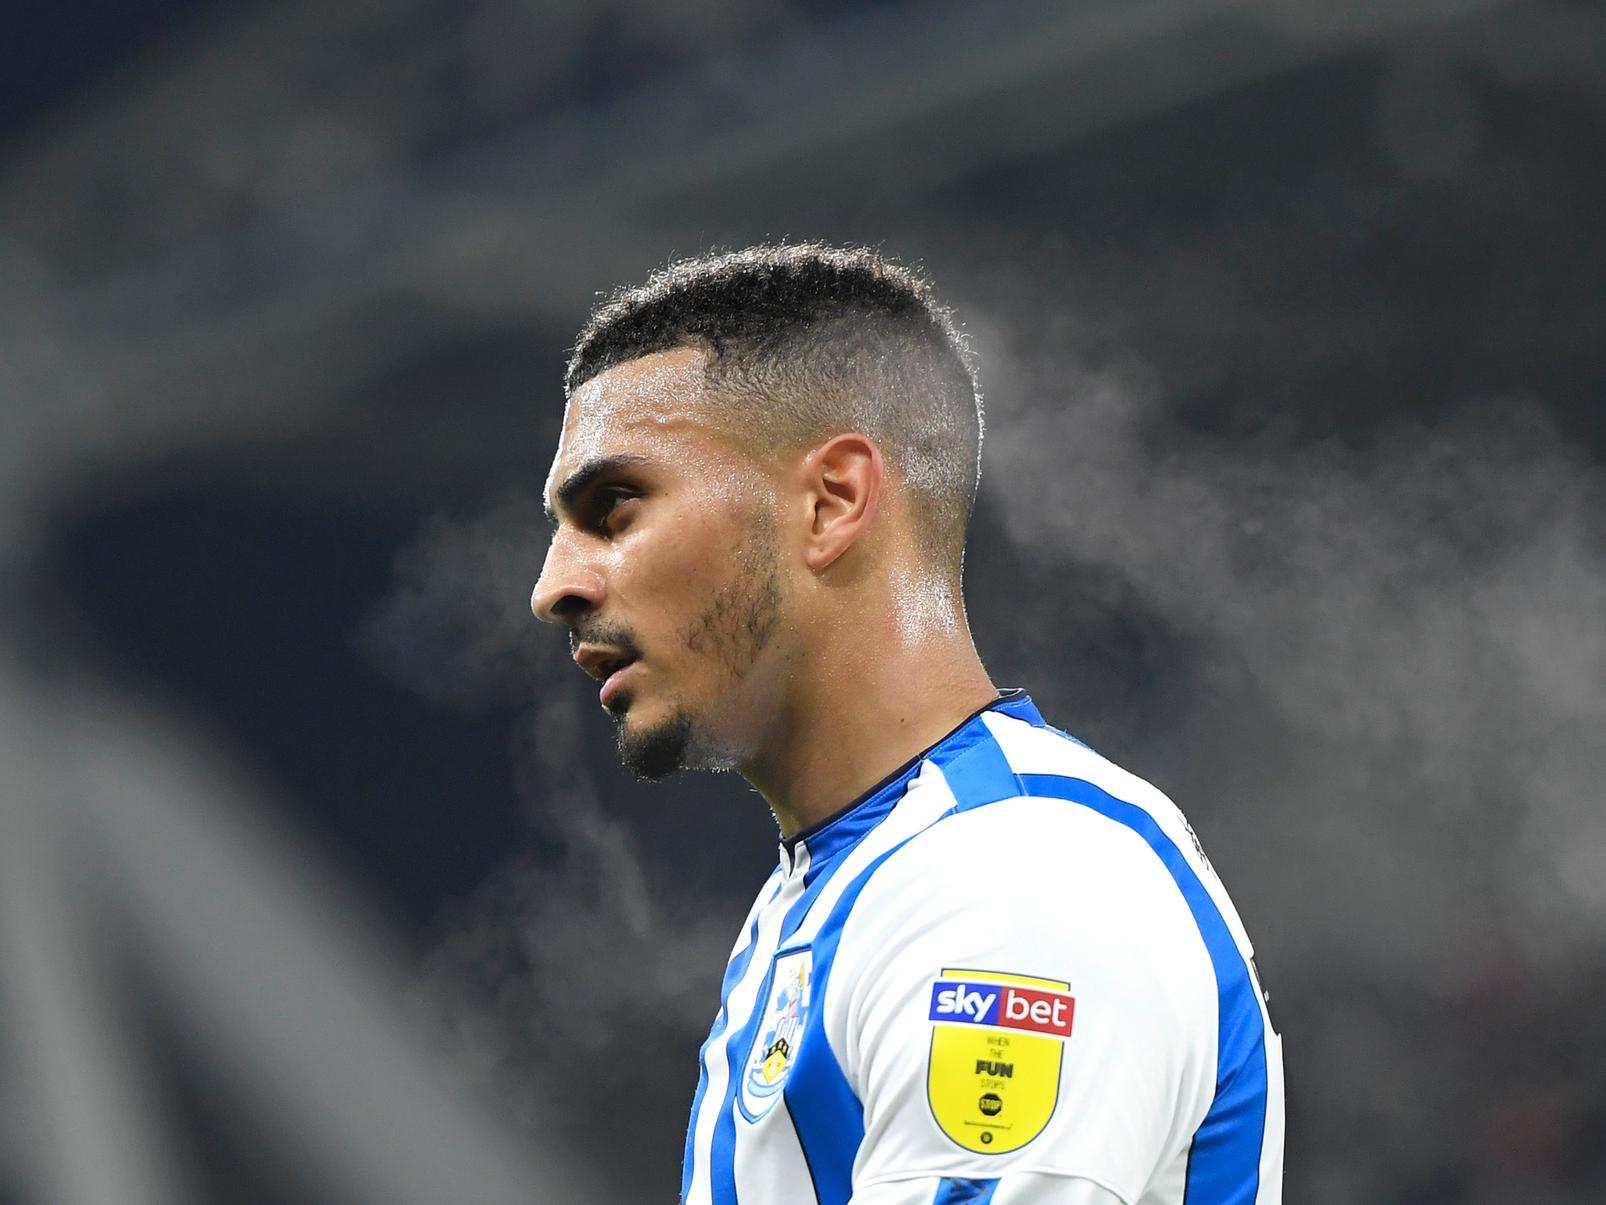 Huddersfield Town boss Danny Cowley has revealed that forward Karlan Grant's abdomen injury is worse than he initially feared, but has backed his player to return to match fitness quickly. (Huddersfield Examiner)